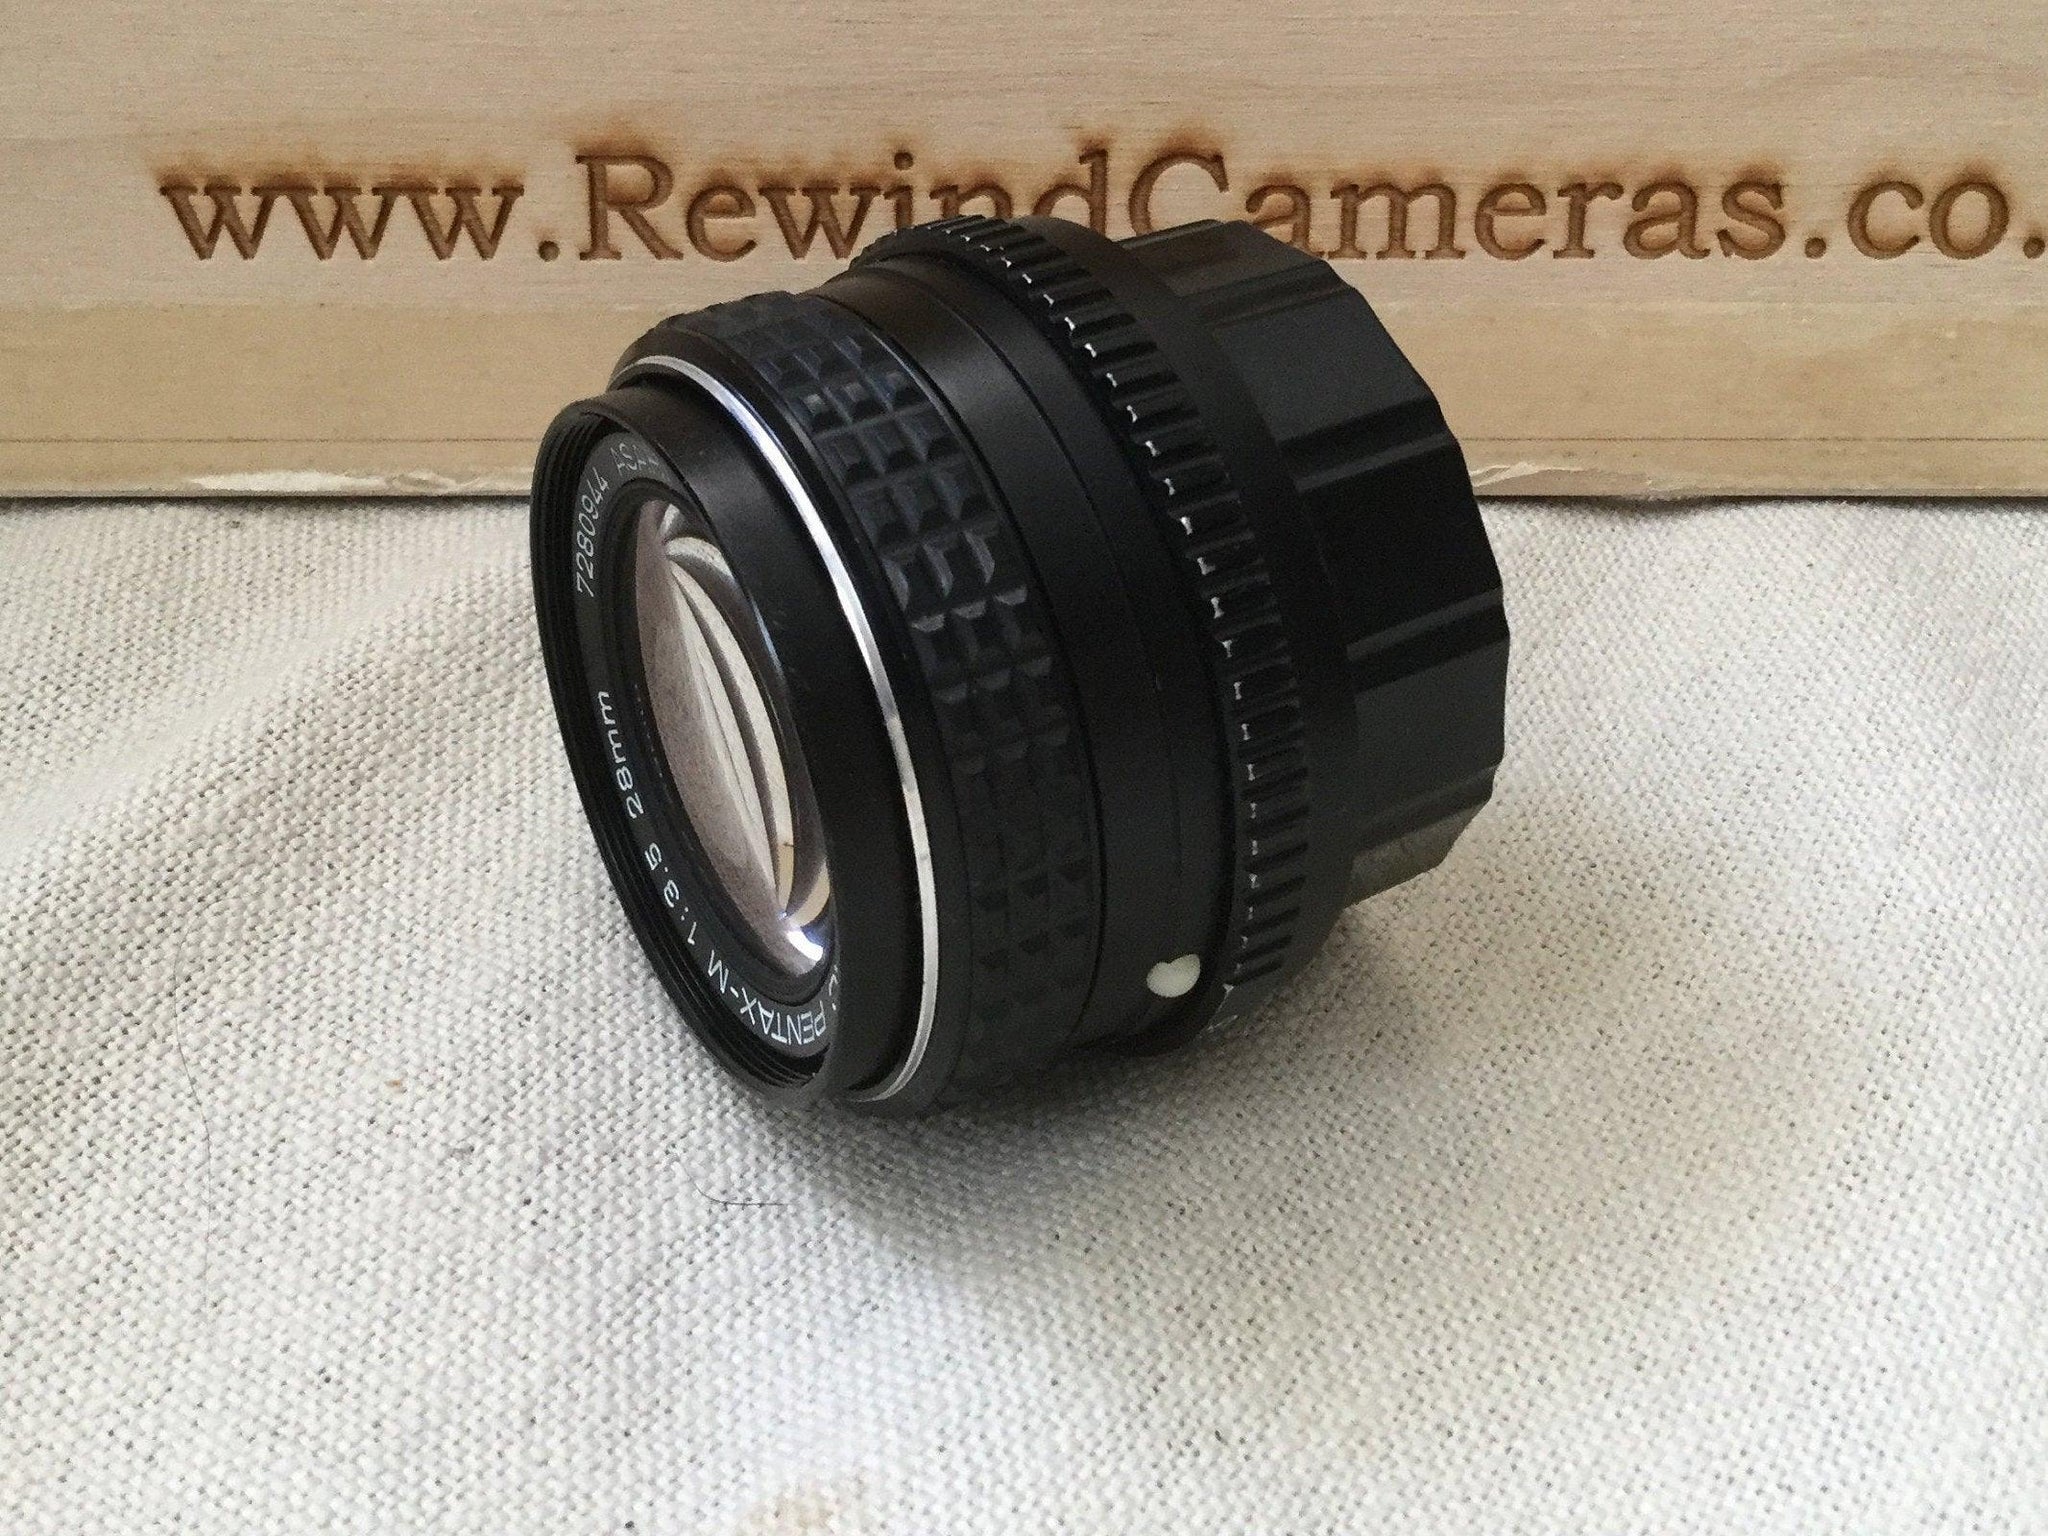 Pentax M 28mm 3.5 Lens wide angle lens, the focus works correctly and the aperture is good and snappy. Great sharp bright prime lens - RewindCameras quality vintage cameras, fully tested and 